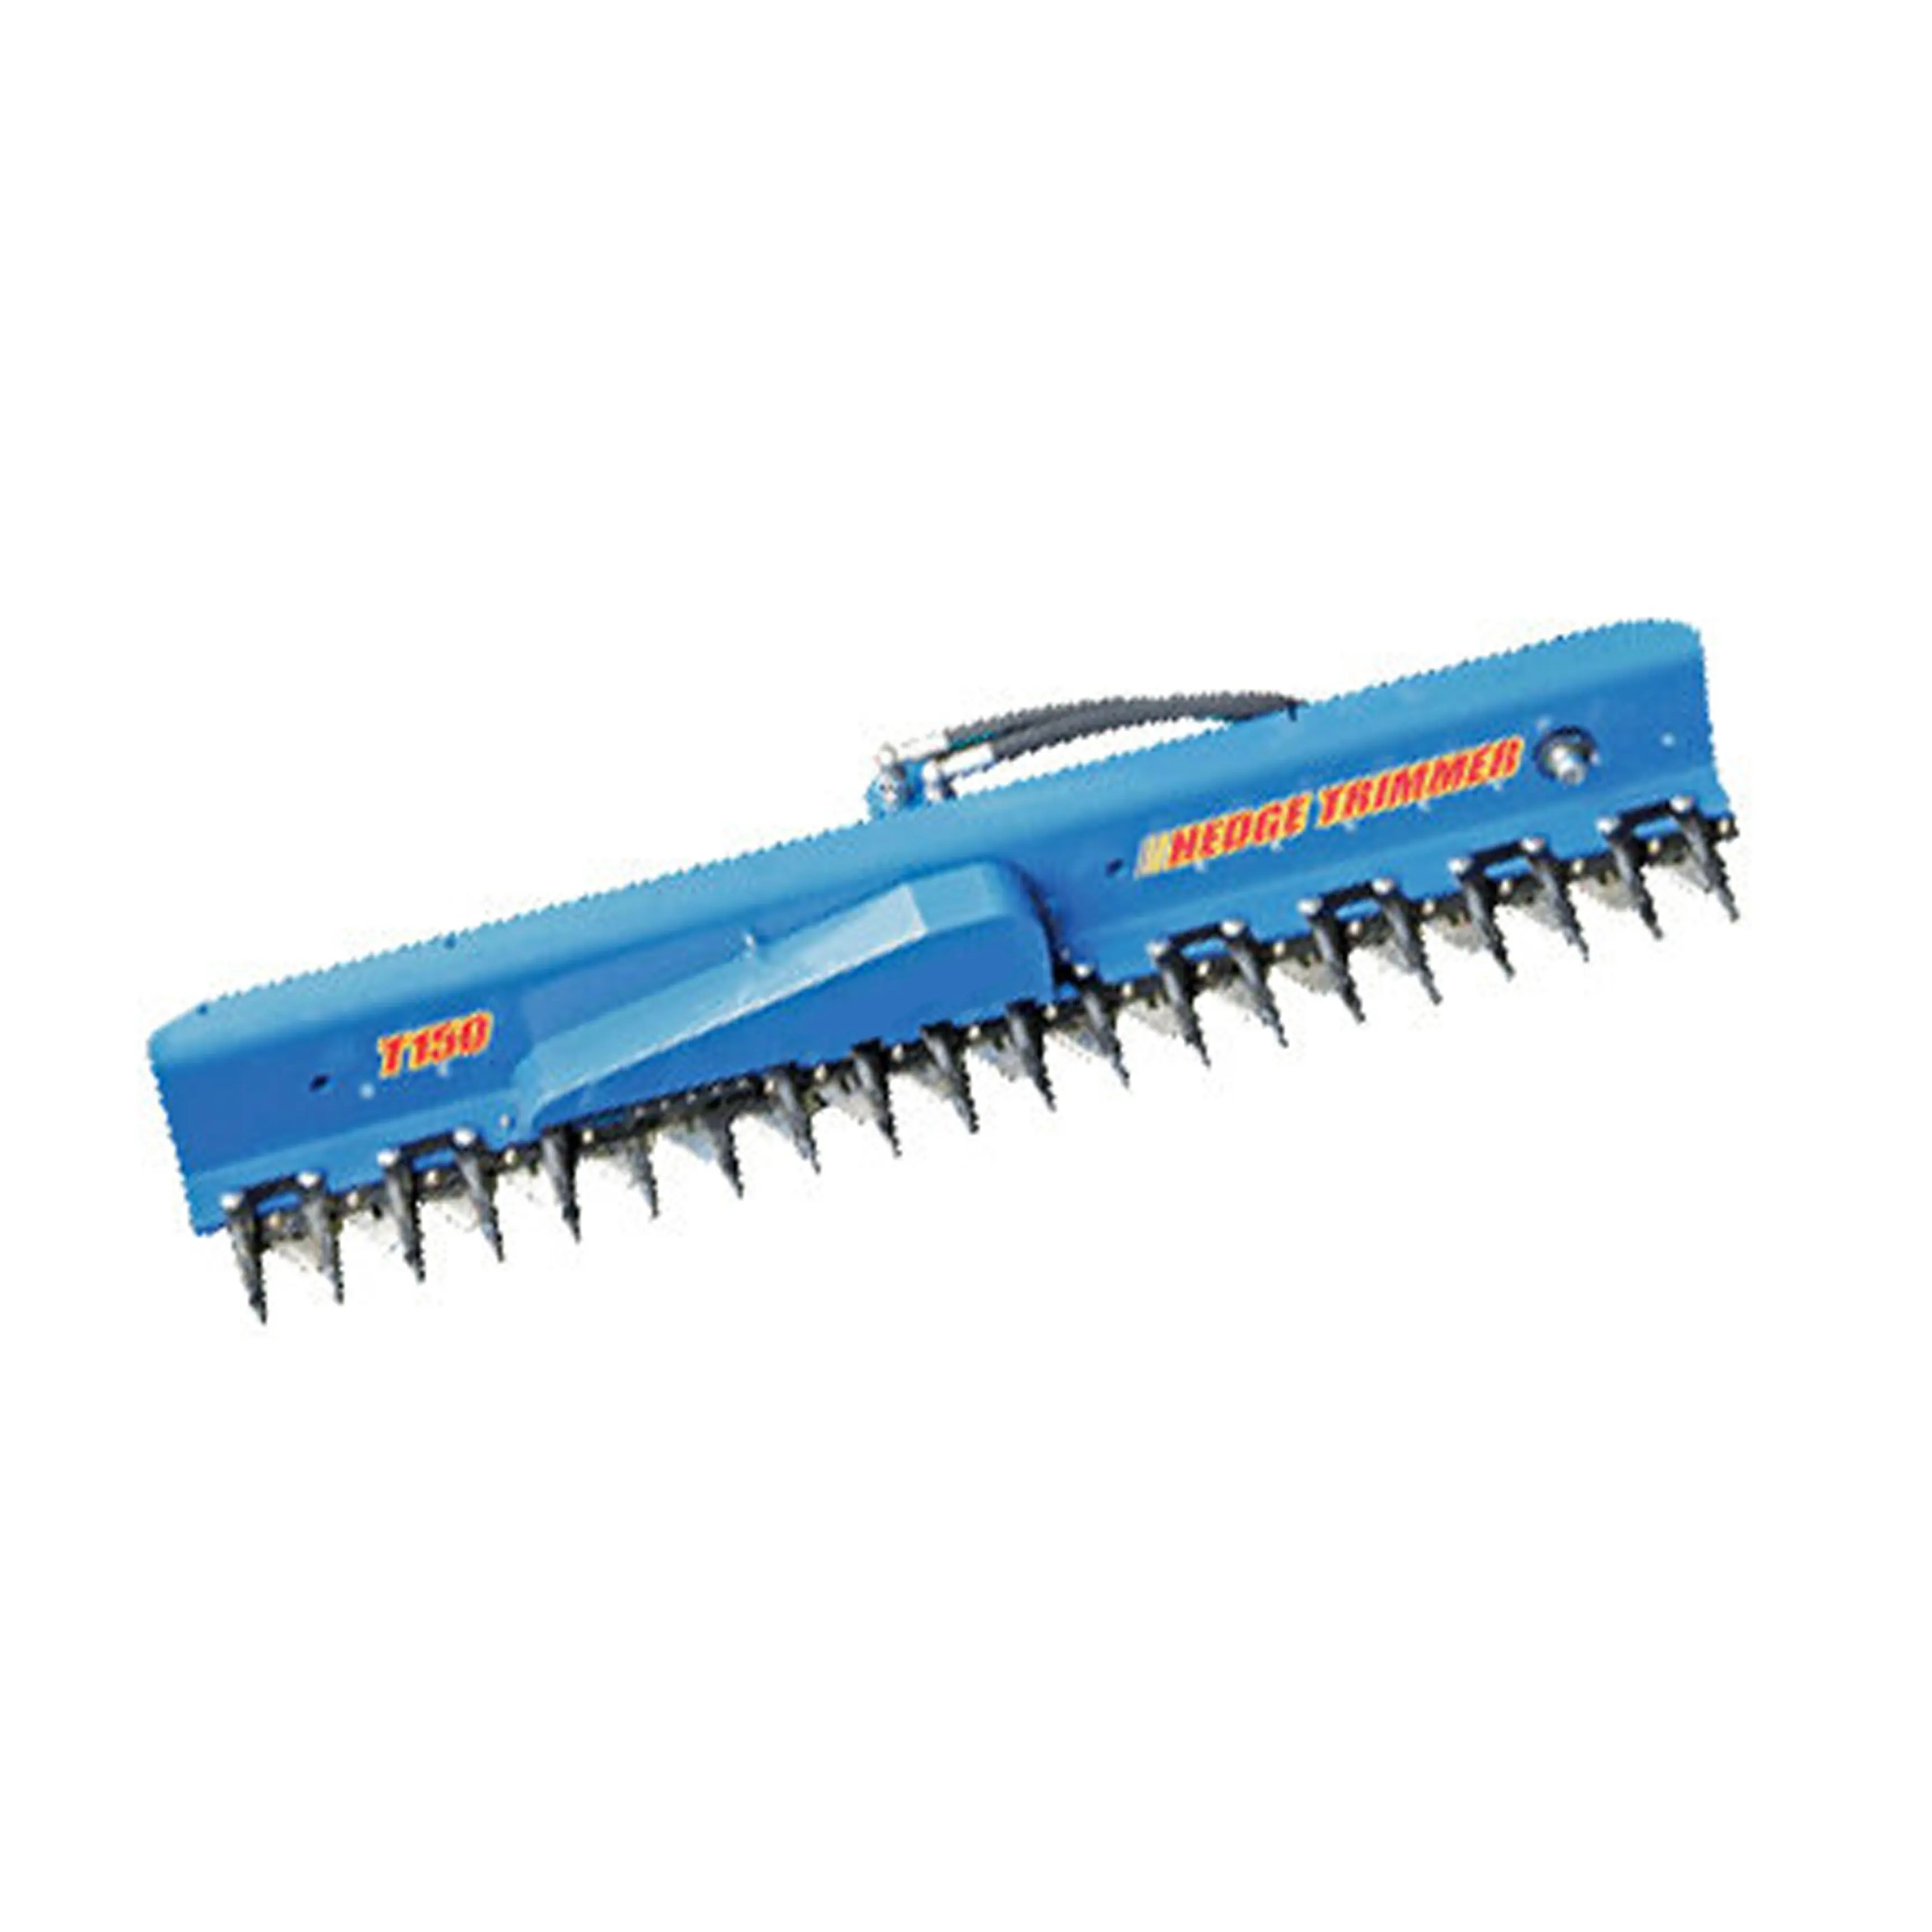 Huike Hydraulic agriculture hedge trimmer for excavator / digger